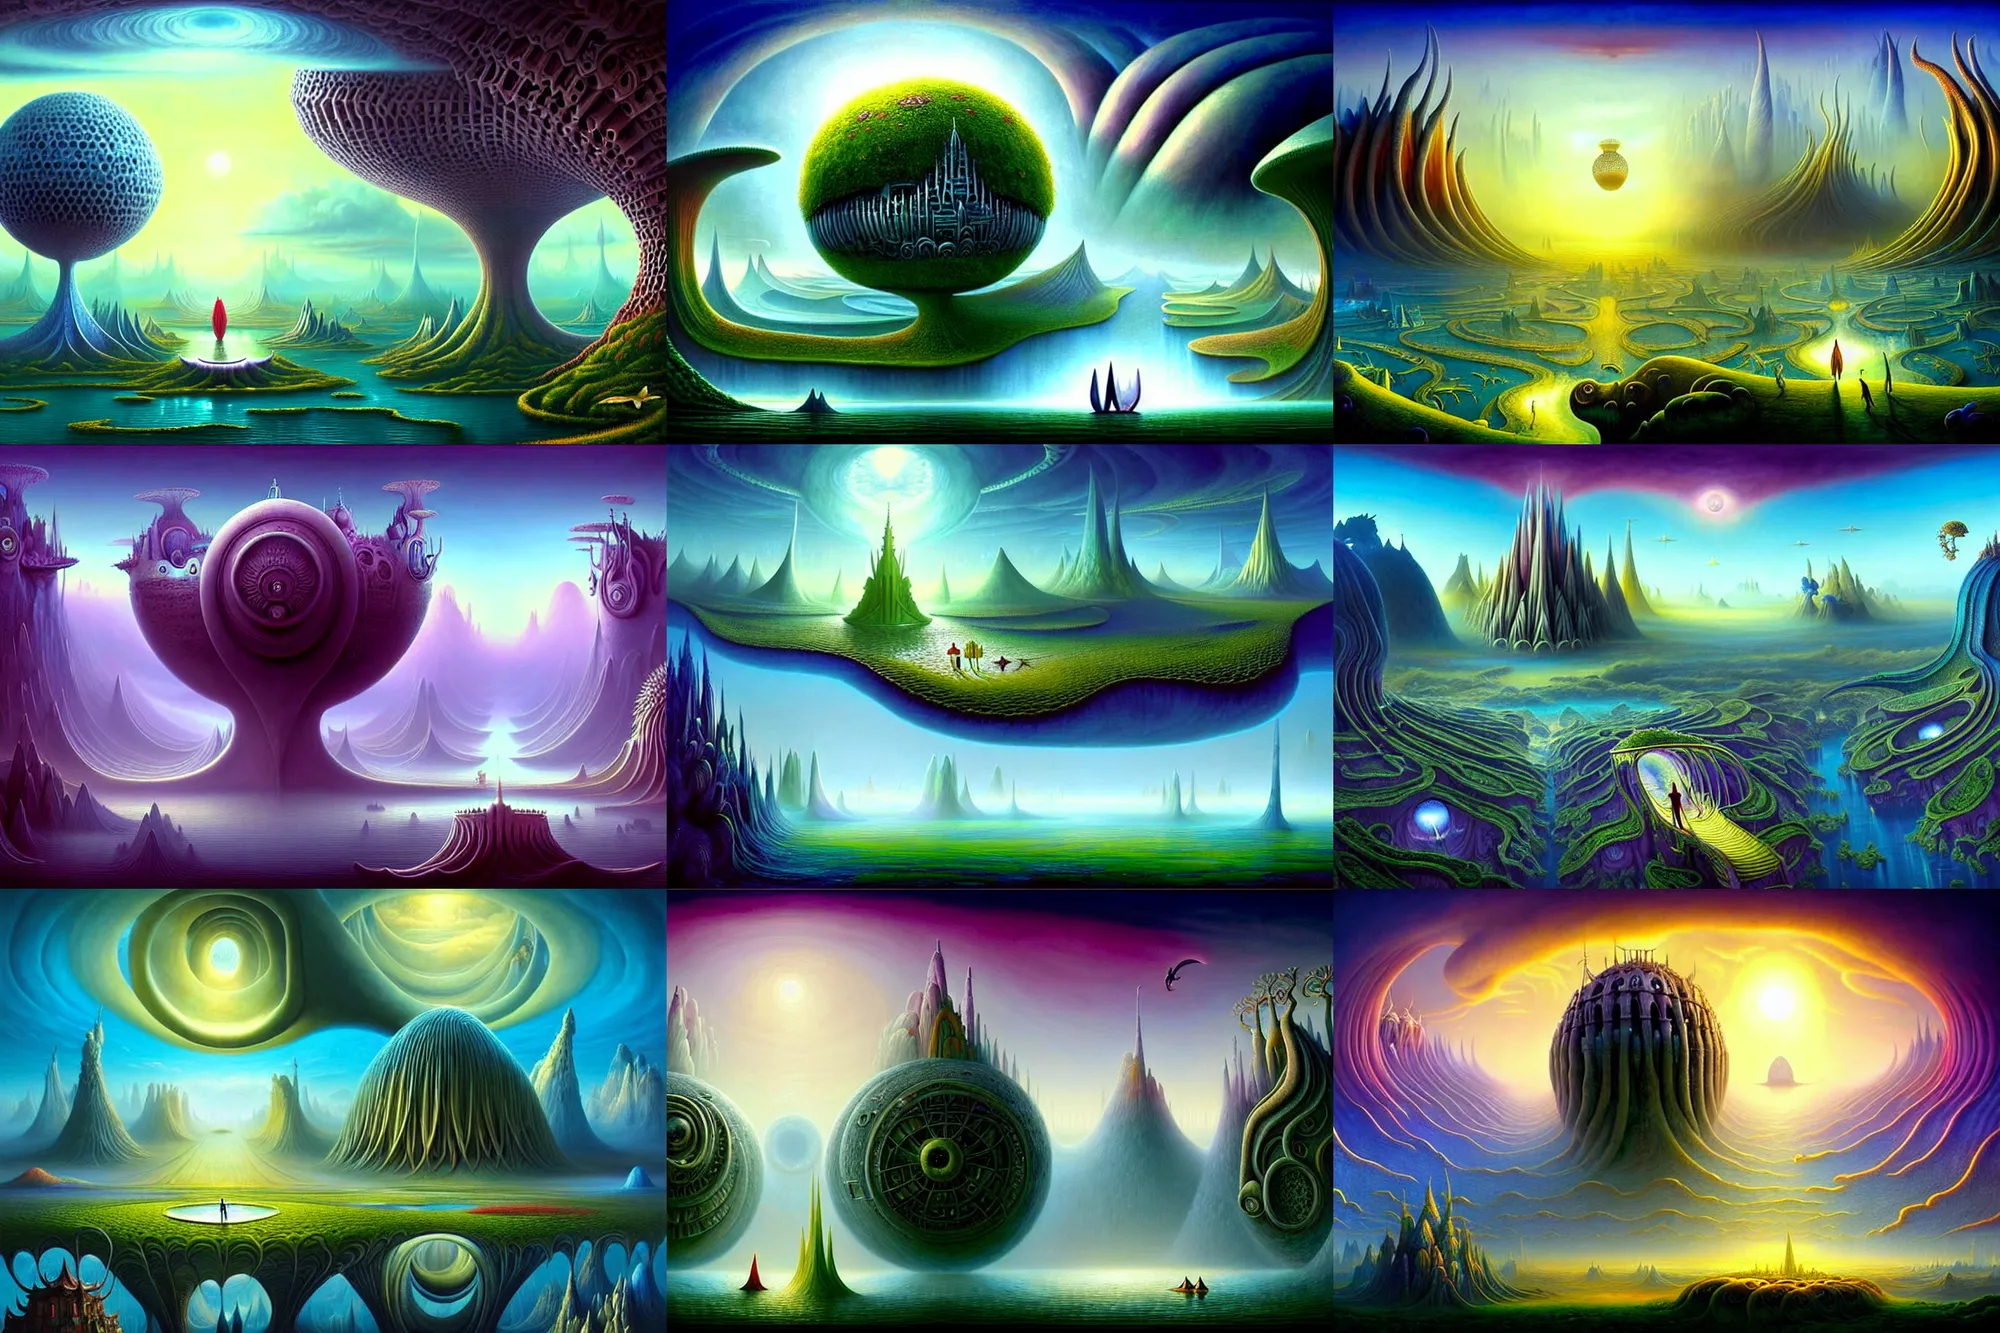 Prompt: a beautiful epic stunning amazing and insanely detailed matte painting on canvas of alien dream worlds with surreal architecture designed by Heironymous Bosch, mega structures inspired by Heironymous Bosch's Garden of Earthly Delights, the nexus portal, vast surreal landscape and horizon by Cyril Rolando and Andrew Ferez, rich pastel color palette, masterpiece!!, grand!, imaginative!!!, whimsical!!, epic scale, intricate details, sense of awe, elite, wonder, insanely complex, masterful composition, sharp focus